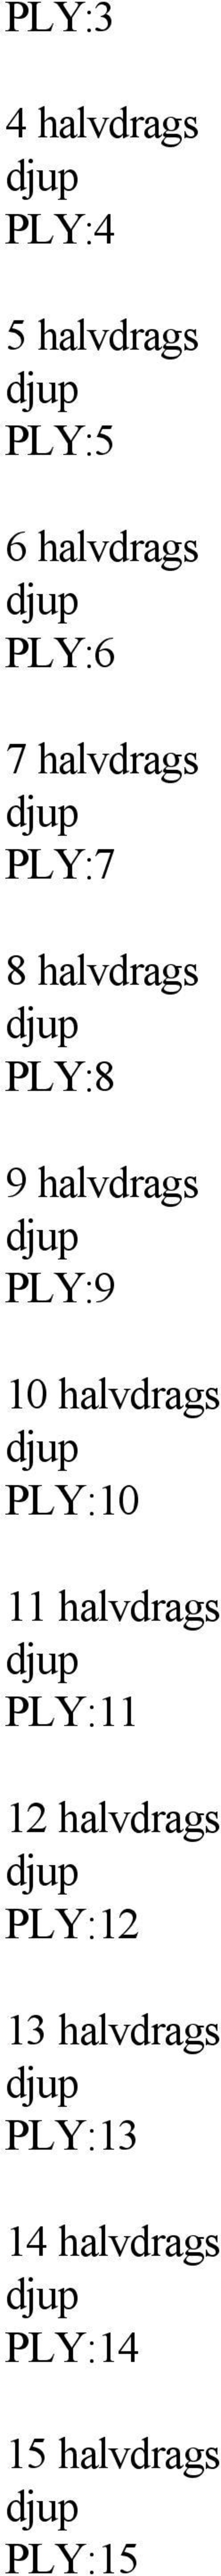 PLY:9 10 halvdrags djup PLY:10 11 halvdrags djup PLY:11 12 halvdrags djup